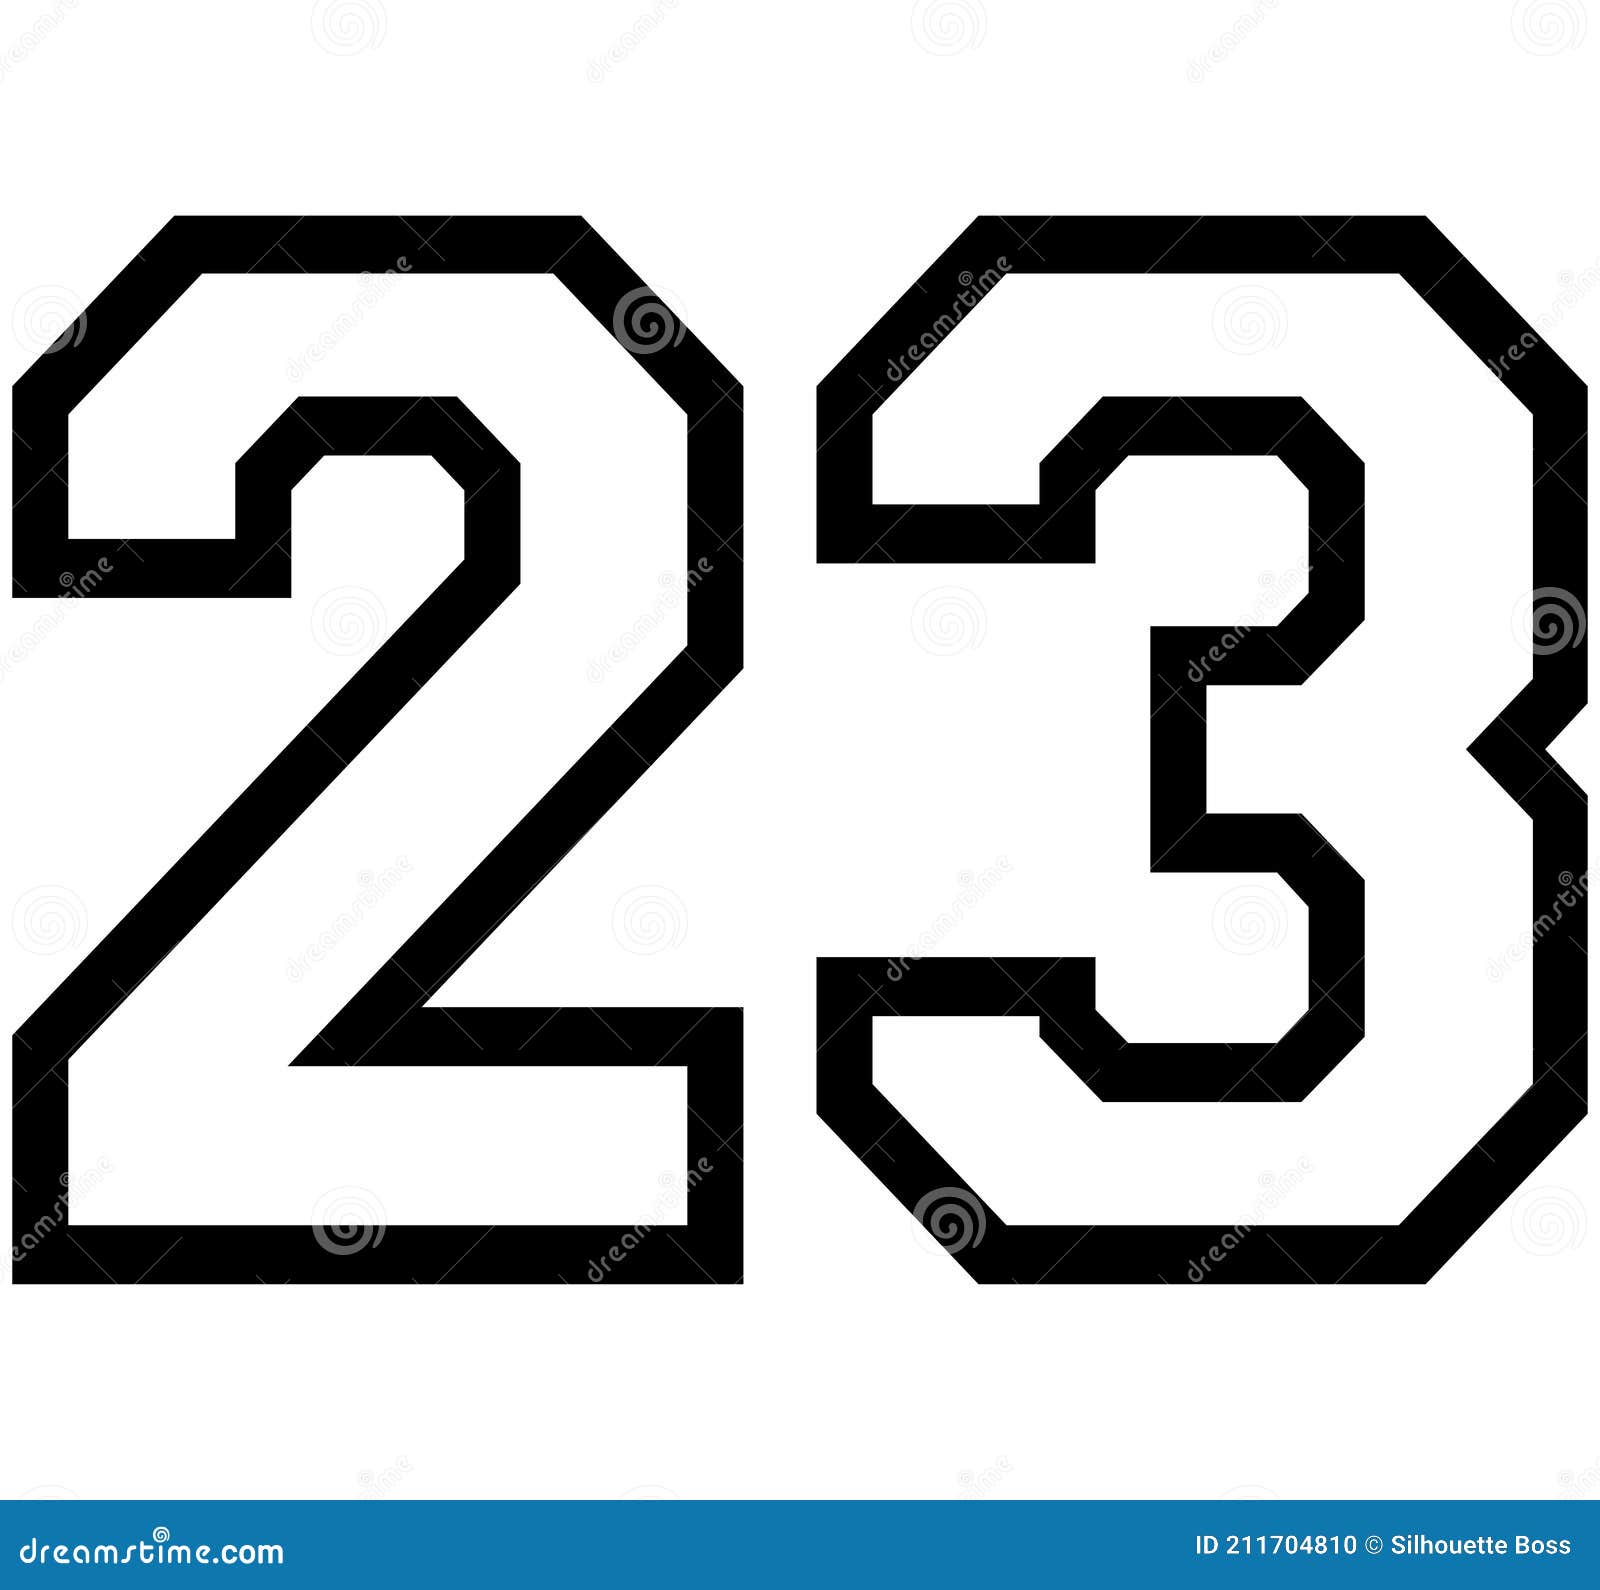 23 American Football Classic Vintage Sport Jersey Number in black number on  white background for american football, baseball or basketball | Metal